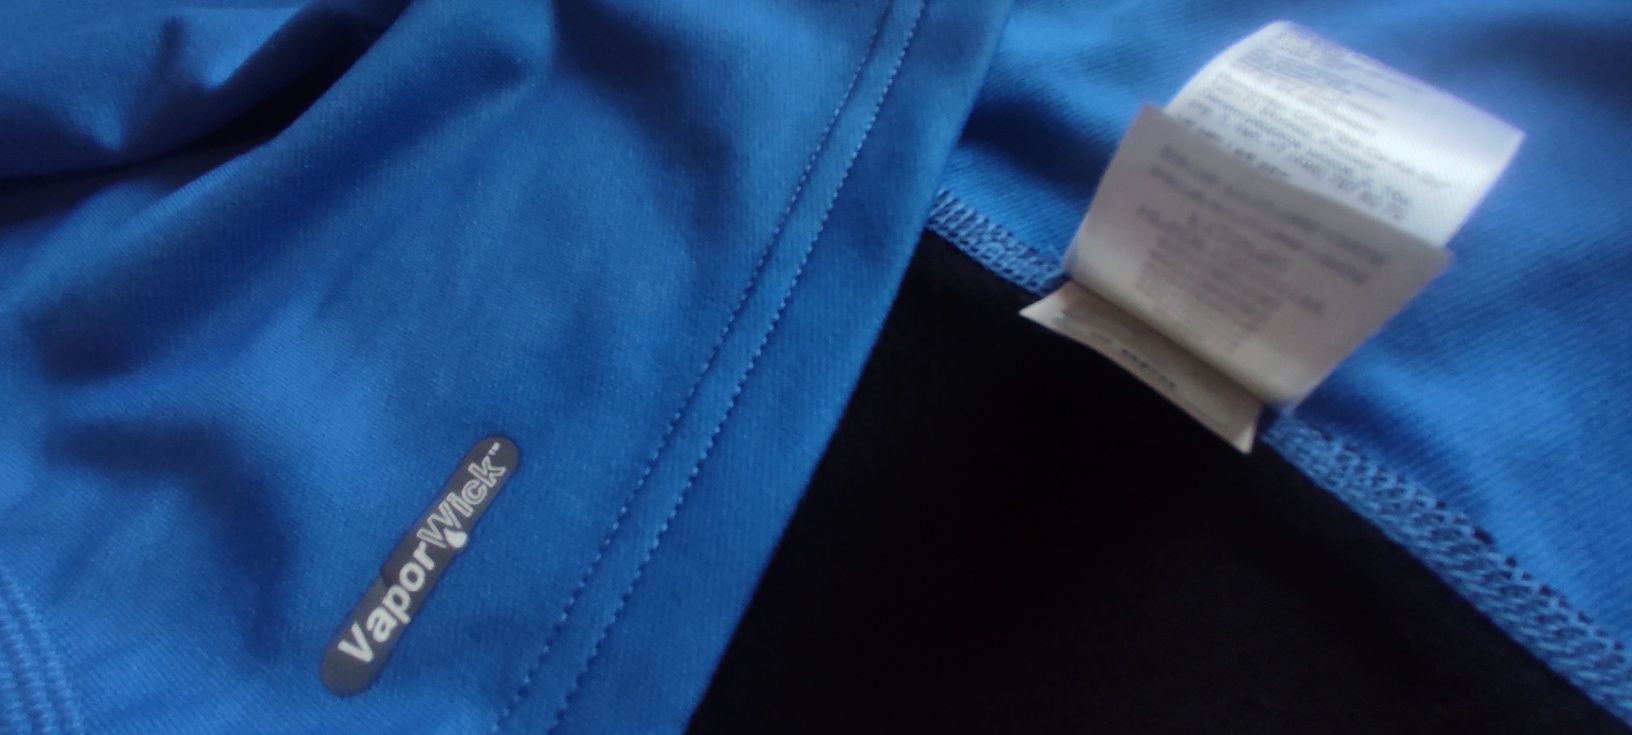 The North Face Impluse 1/4 Zip Top- L размер